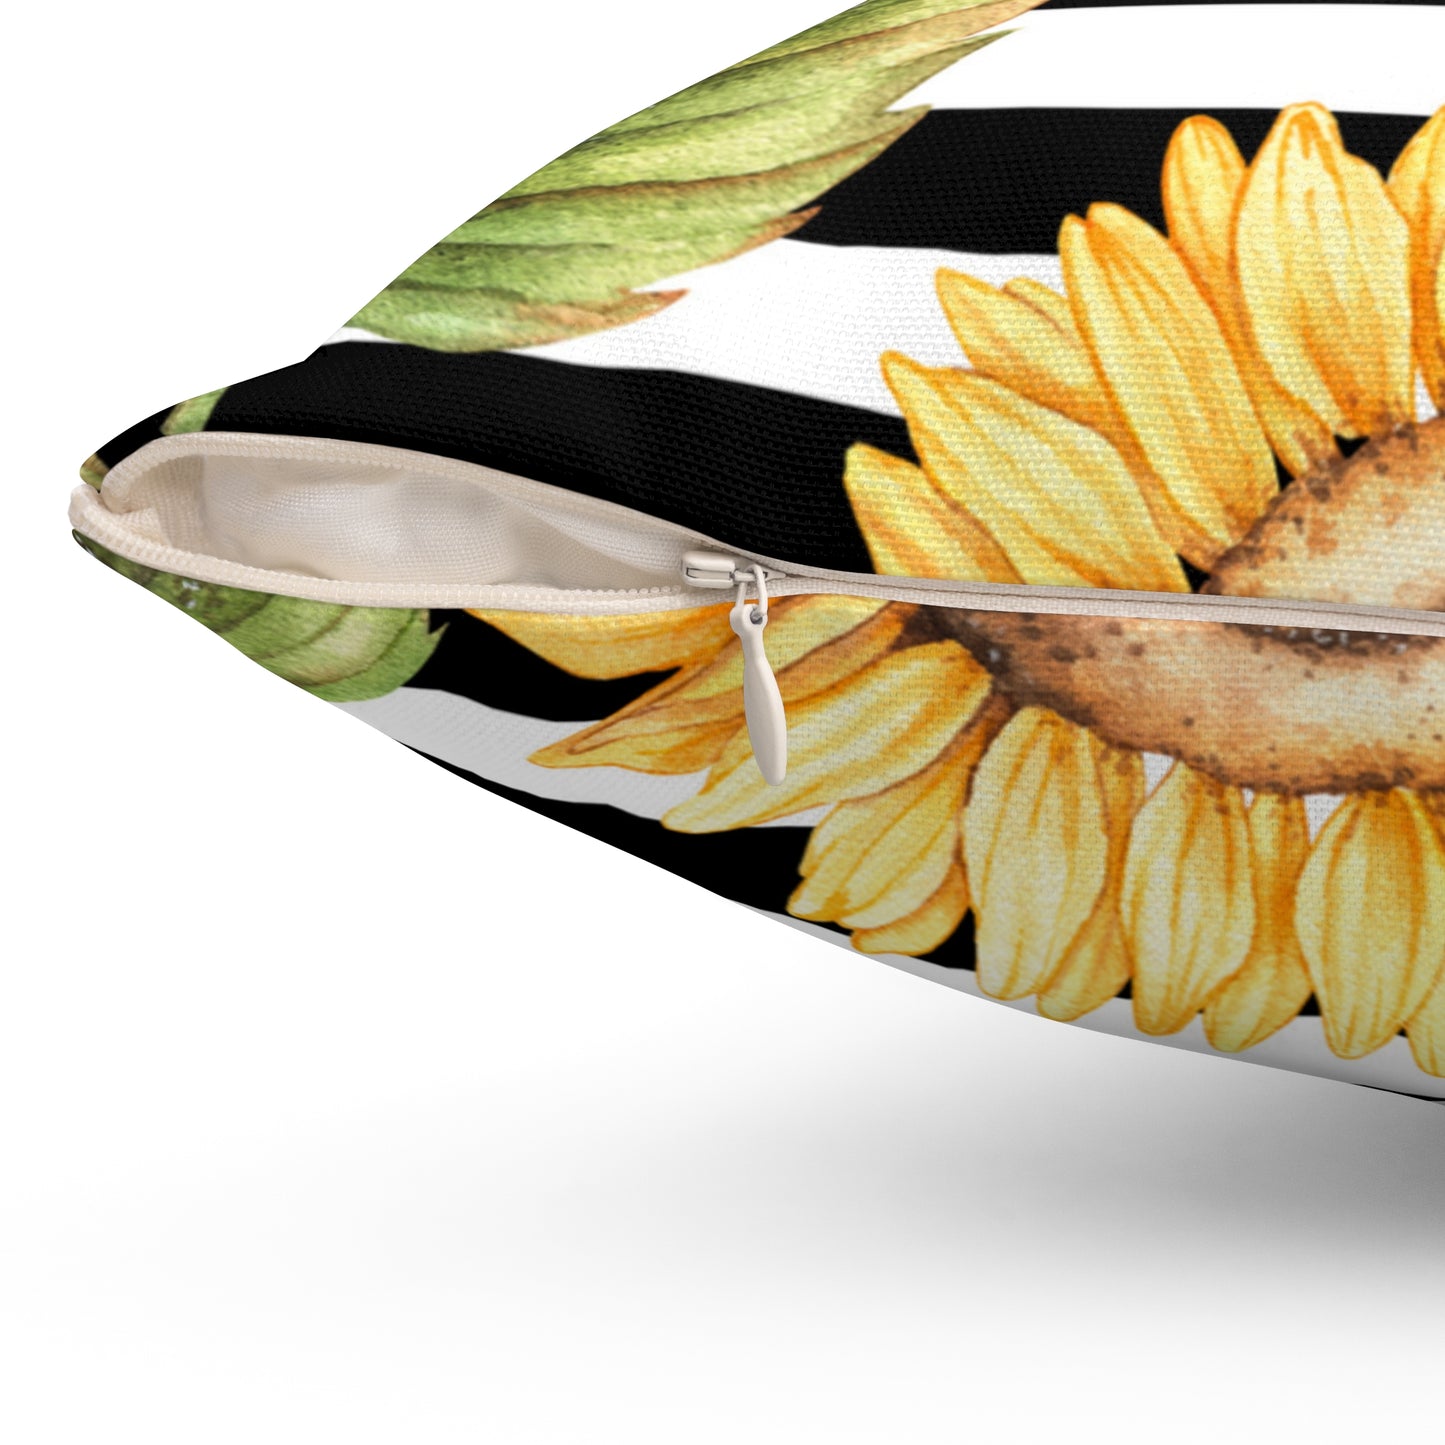 Stripes & Sunflowers Square Pillow